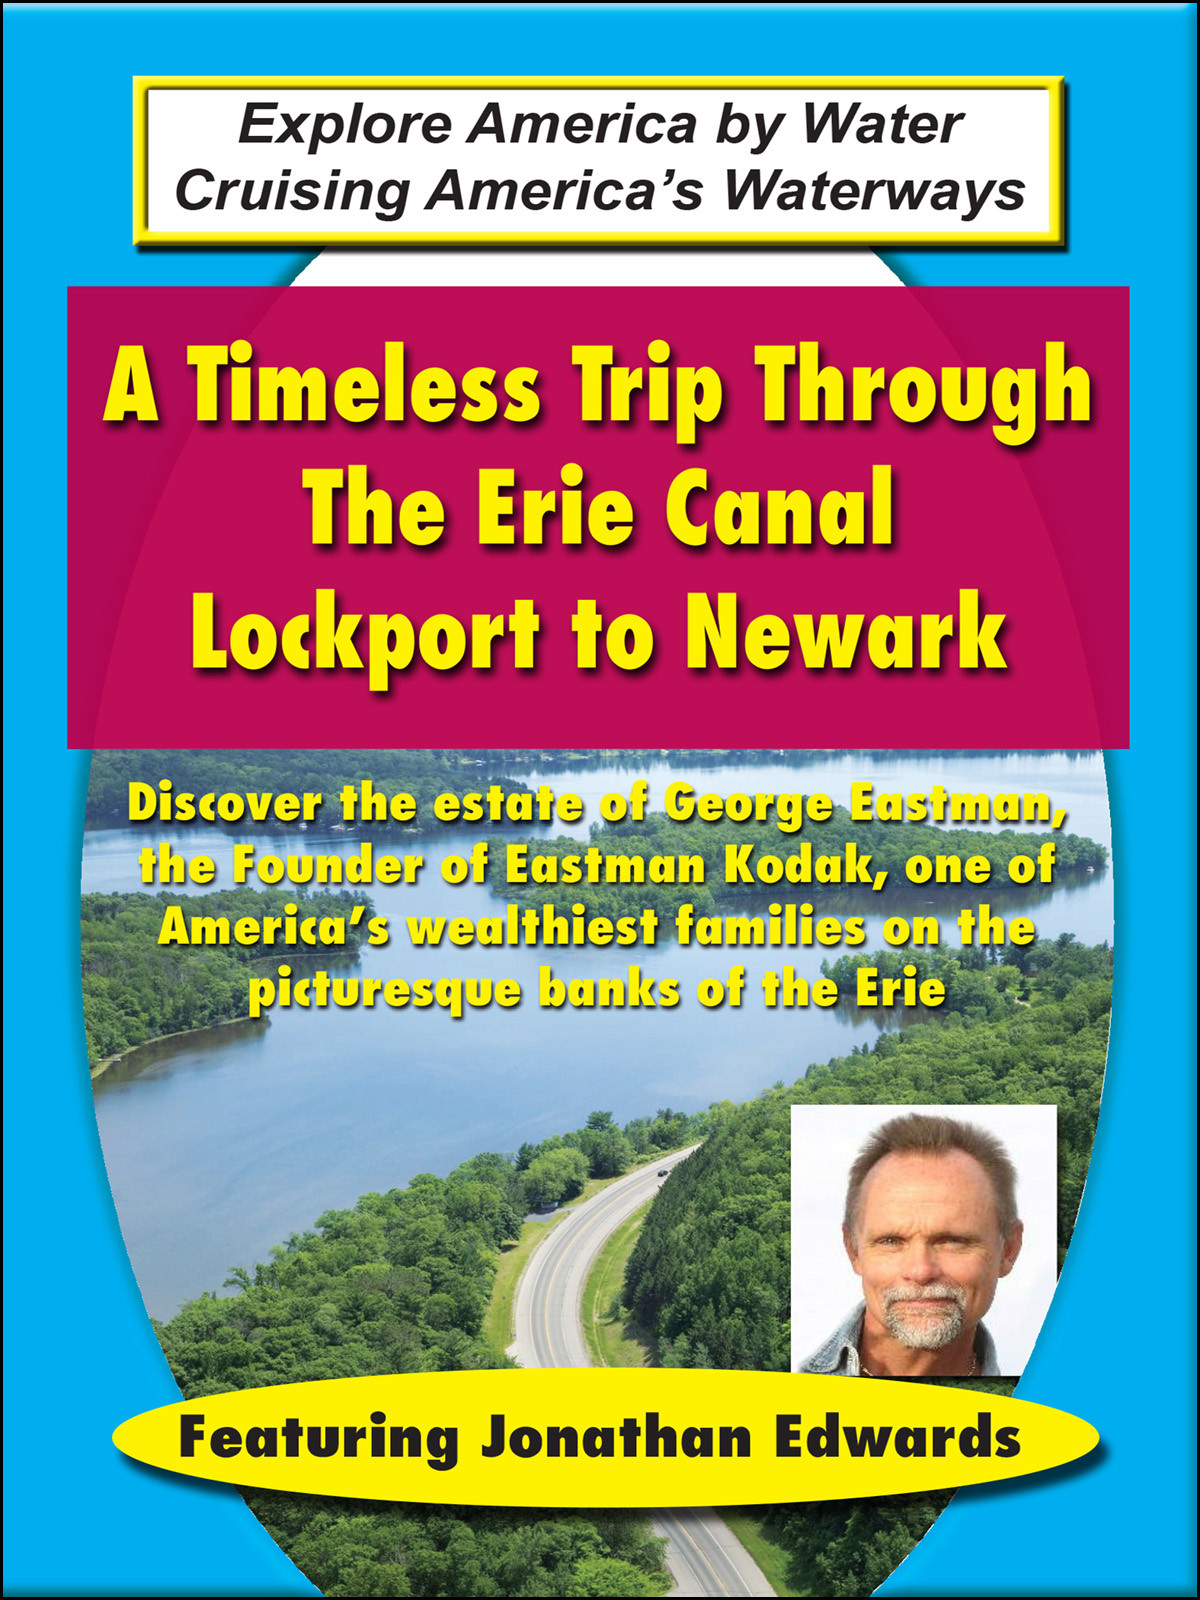 T8903 - A Timeless Trip Through The Erie Canal Lockport to Newark